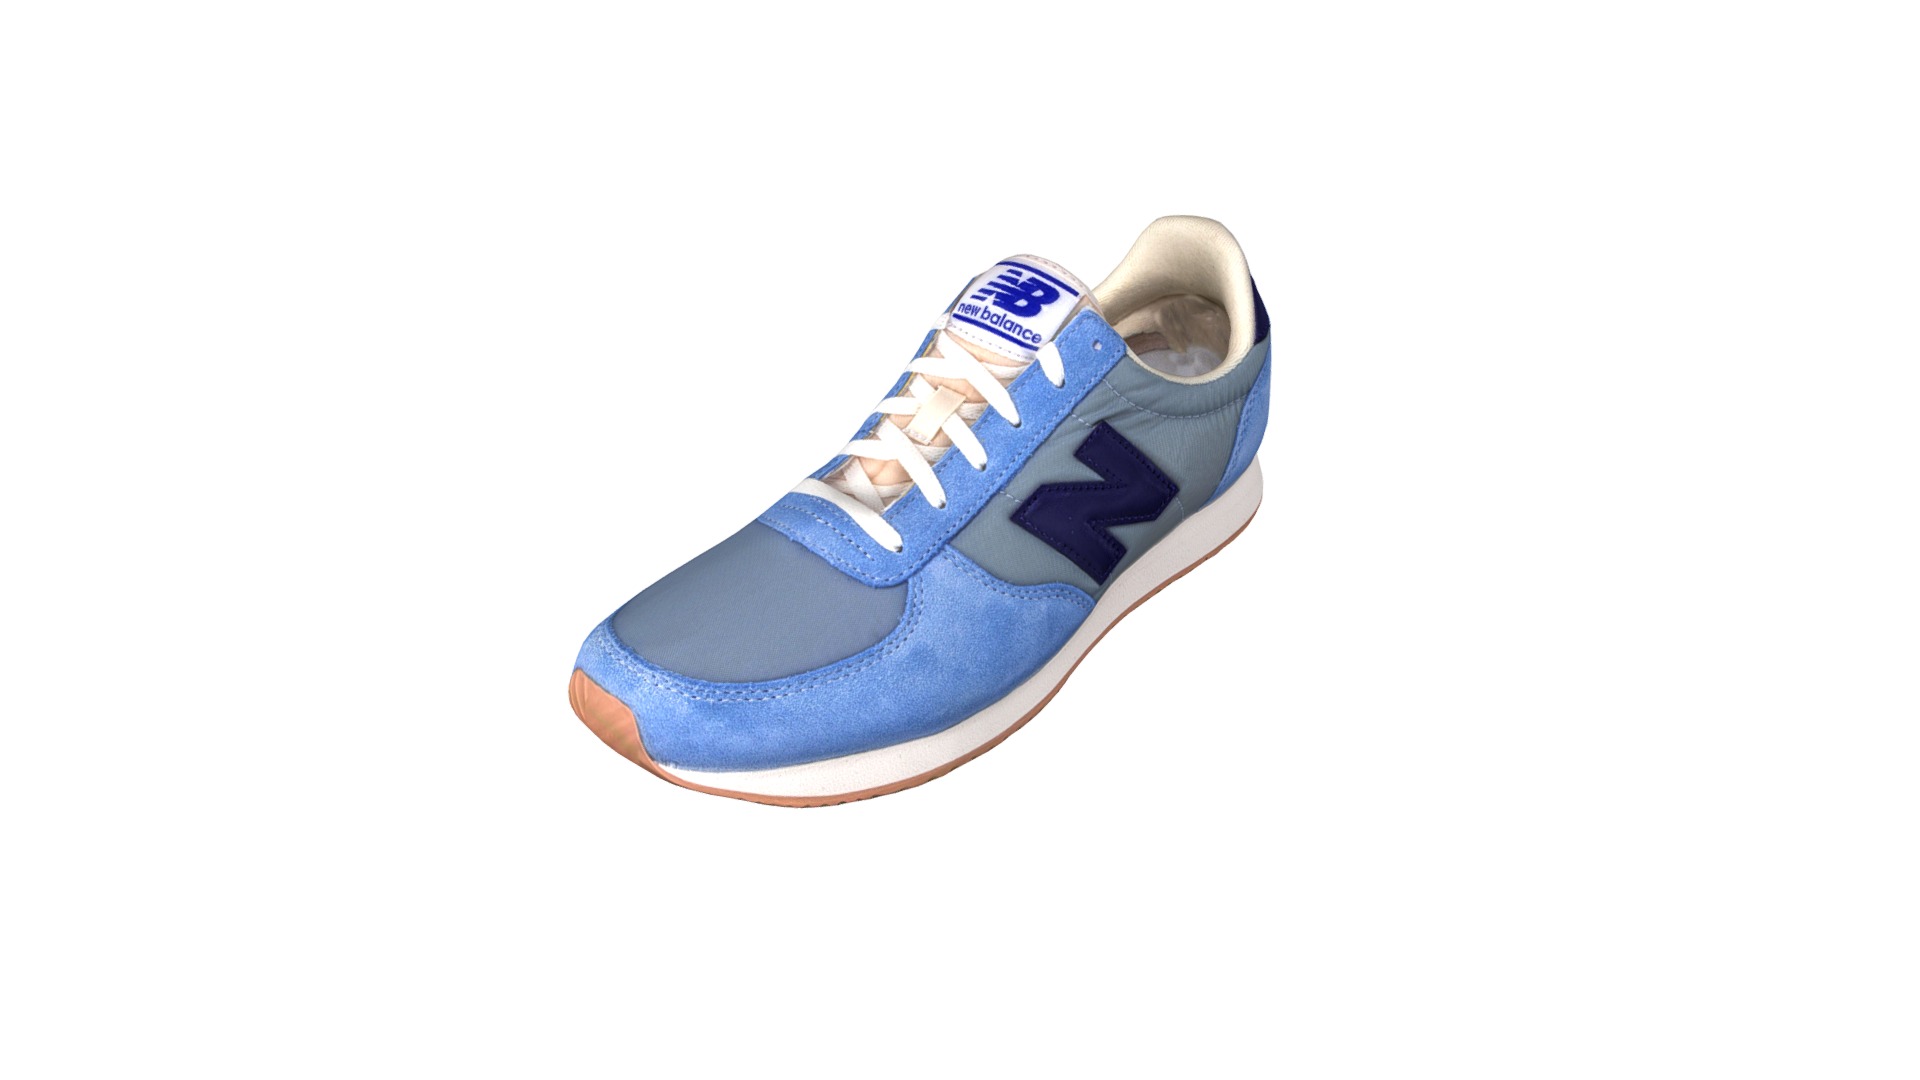 3D model New Balance Sneakers - This is a 3D model of the New Balance Sneakers. The 3D model is about a blue and white shoe.